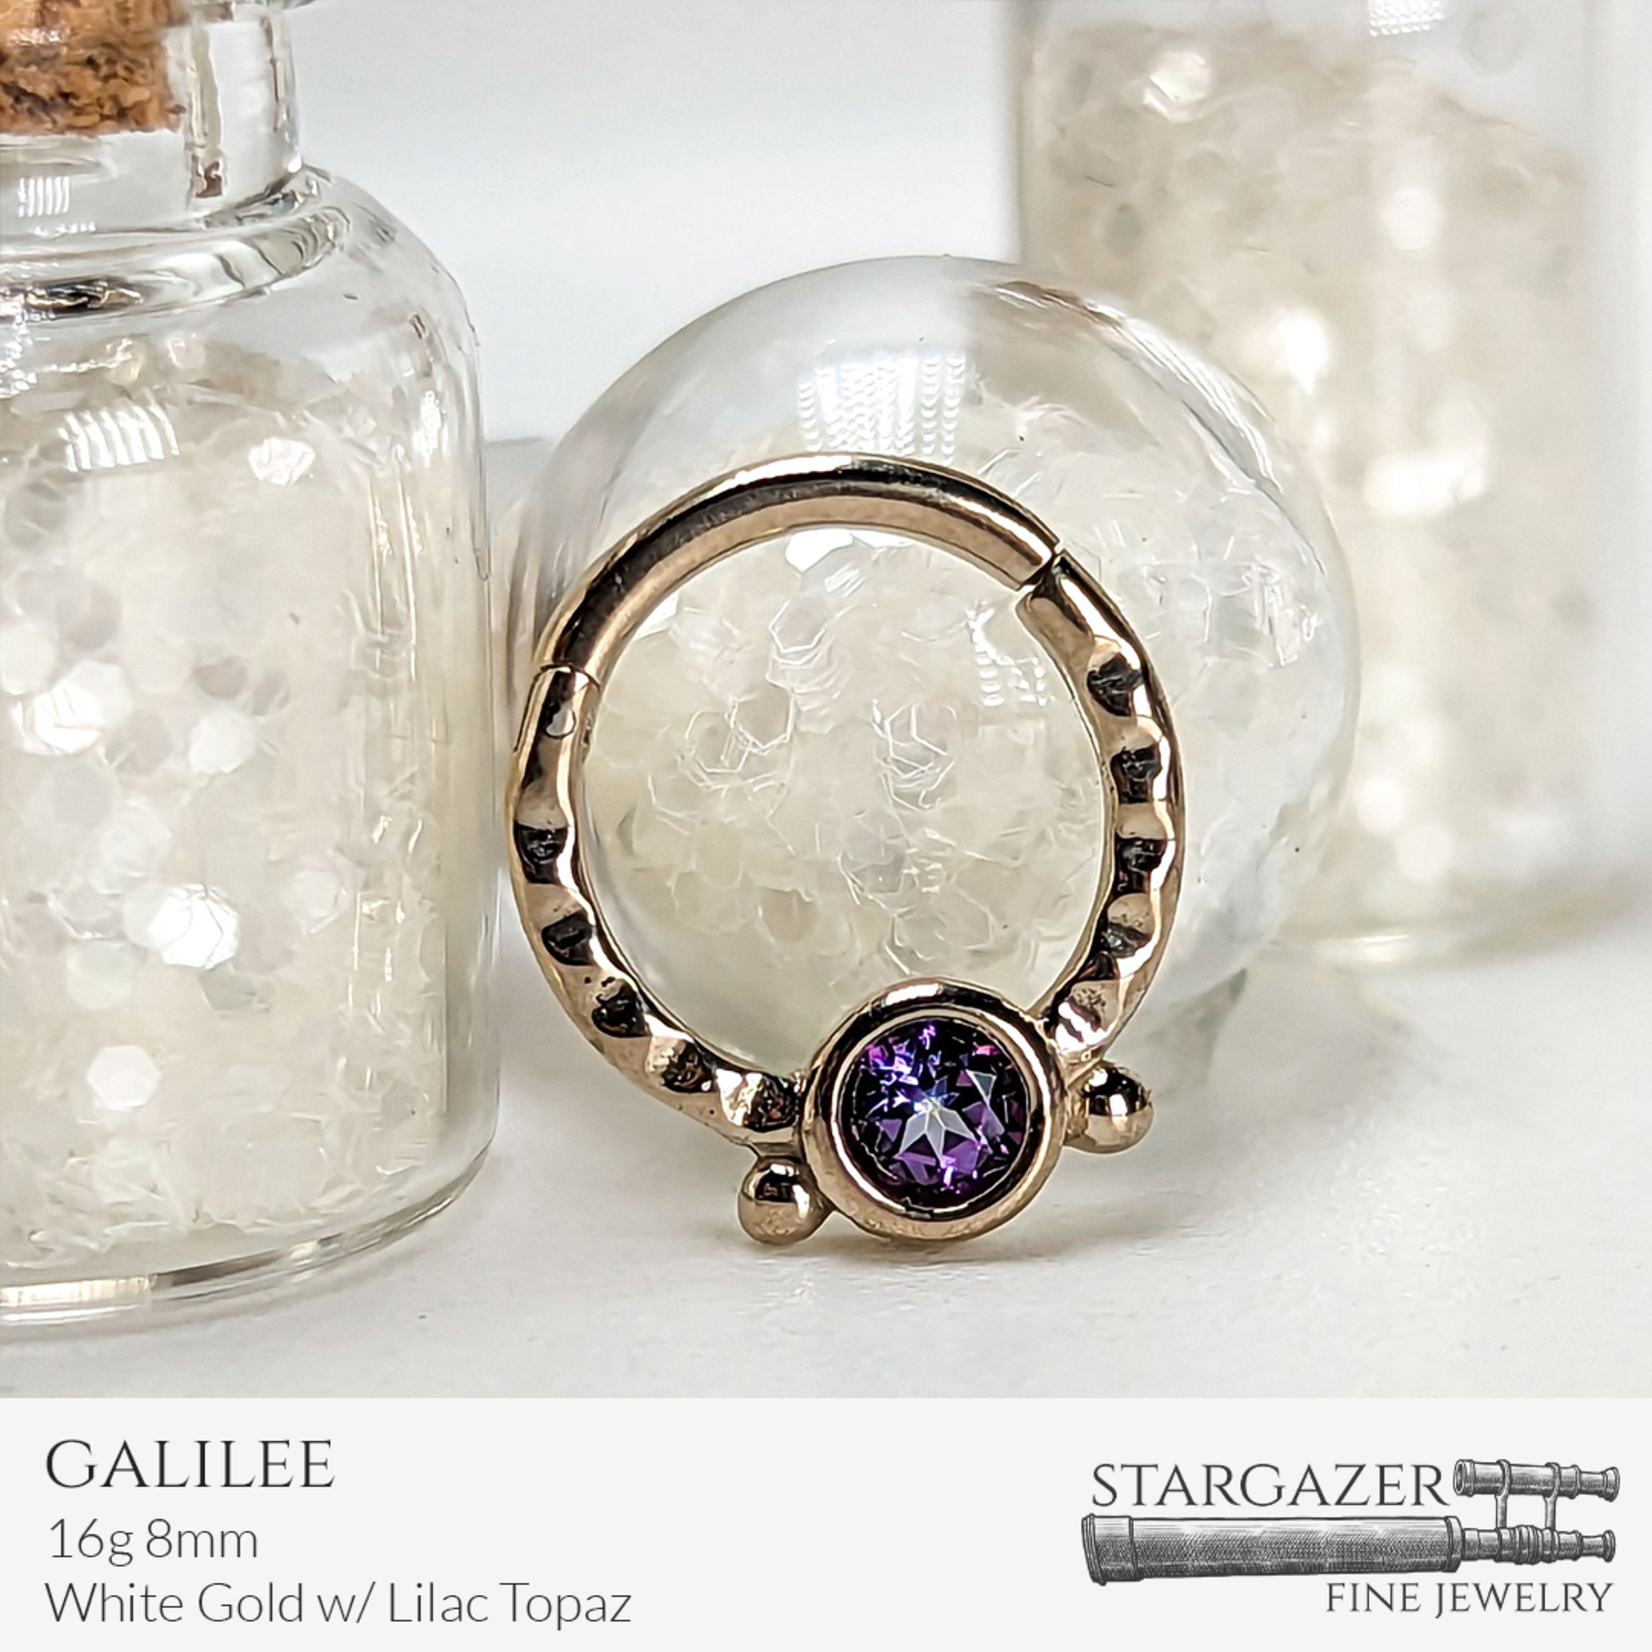 Galilee 16g 8mm; White Gold with Lilac Topaz